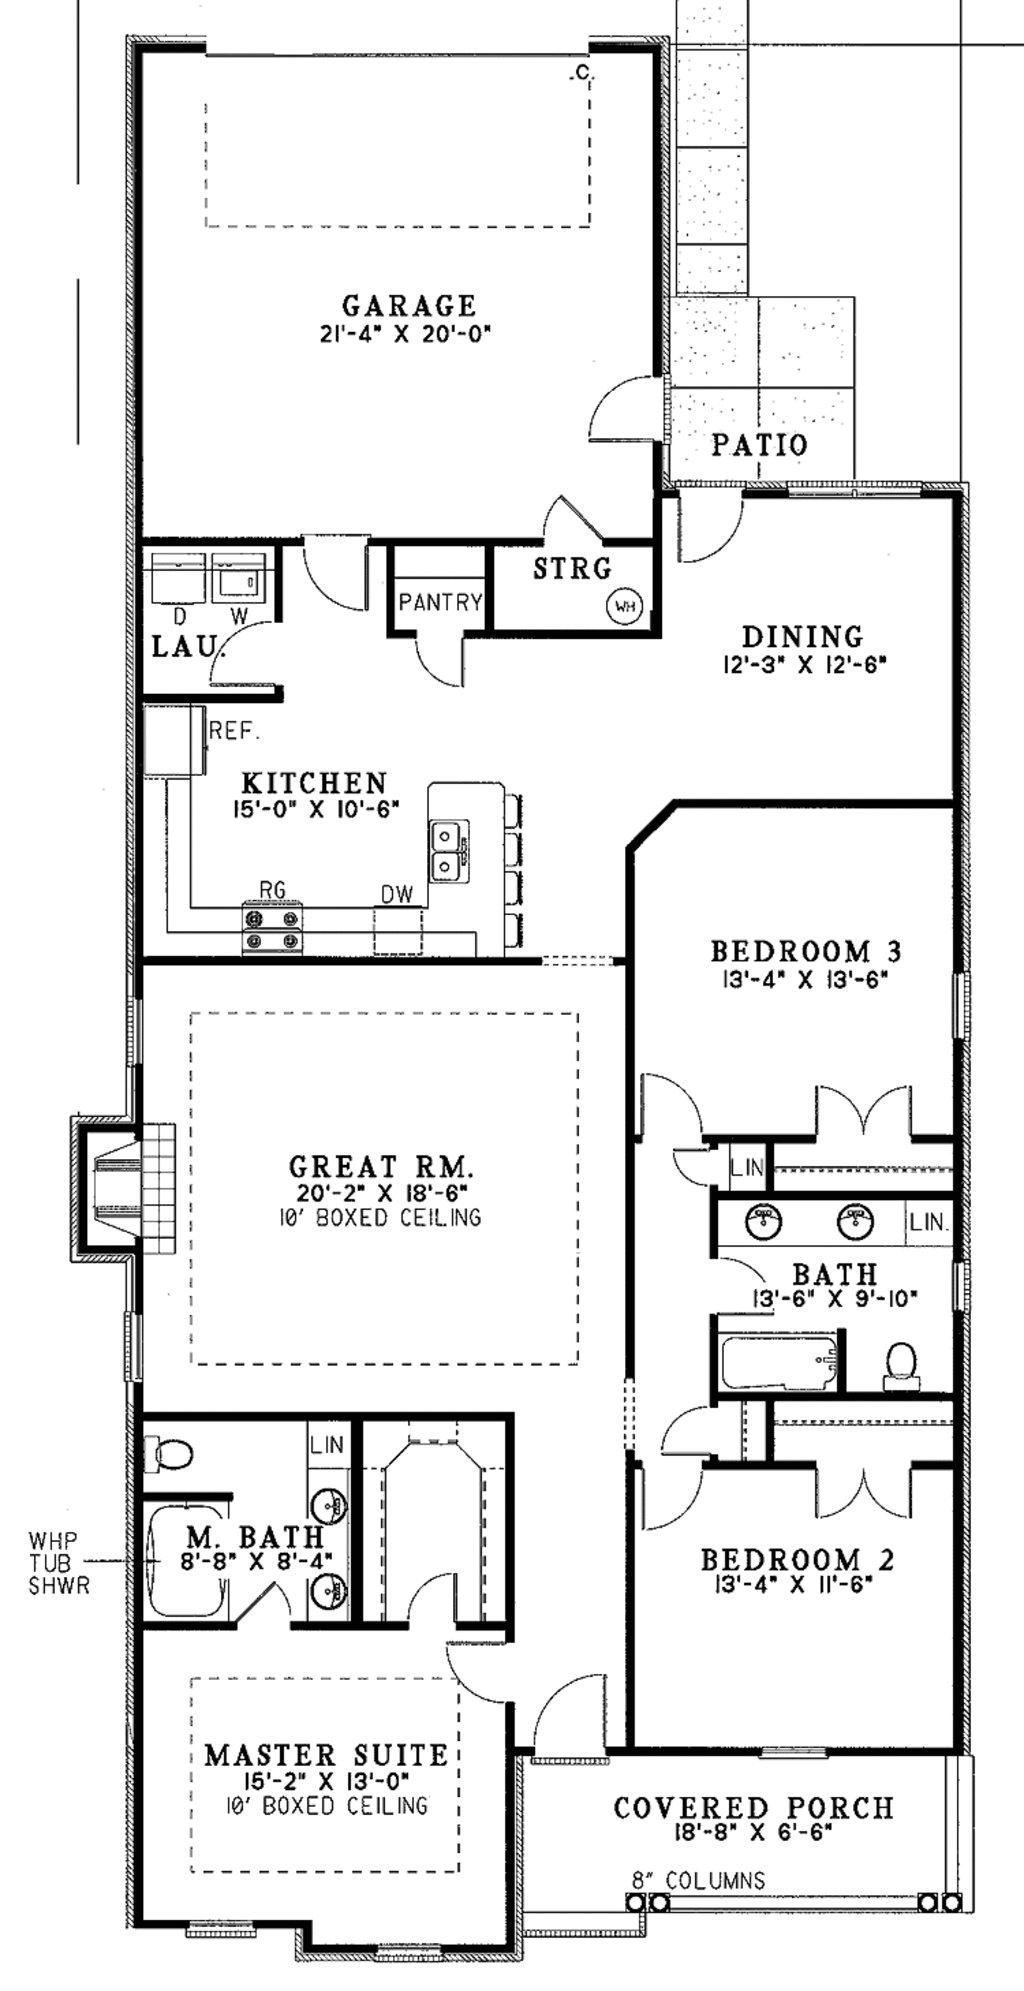 ranch-style-house-plan-3-beds-2-baths-1871-sq-ft-plan-17-2979